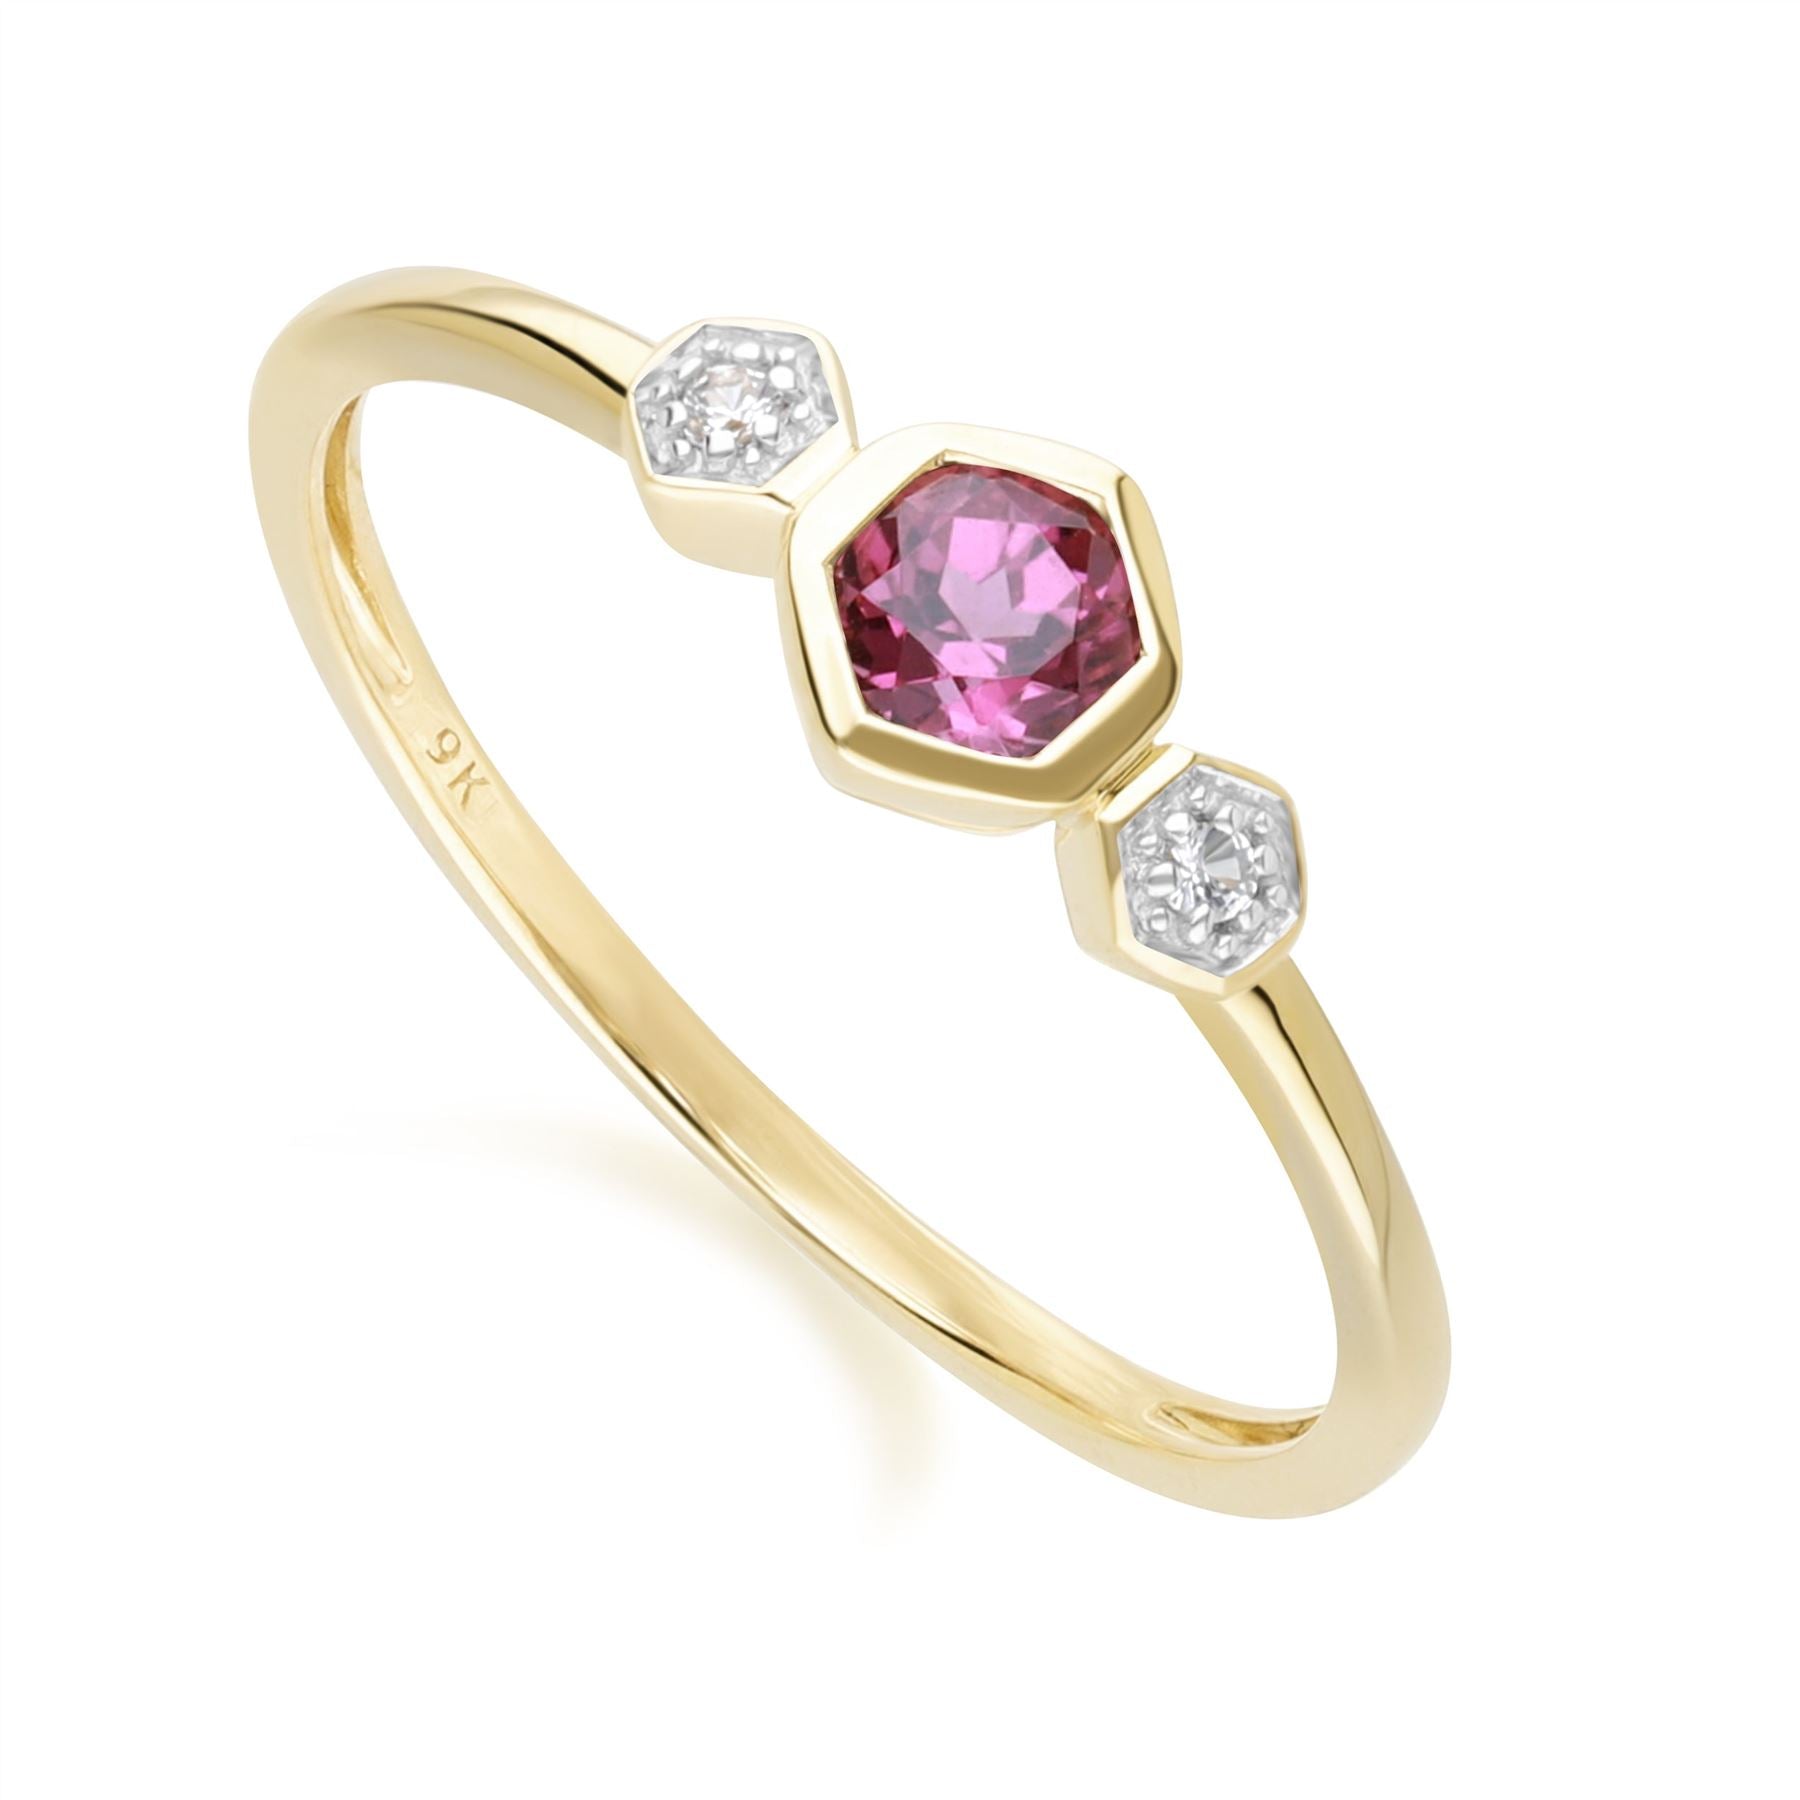 Geometric Round Rhodolite and Sapphire Ring in 9ct Yellow Gold Side